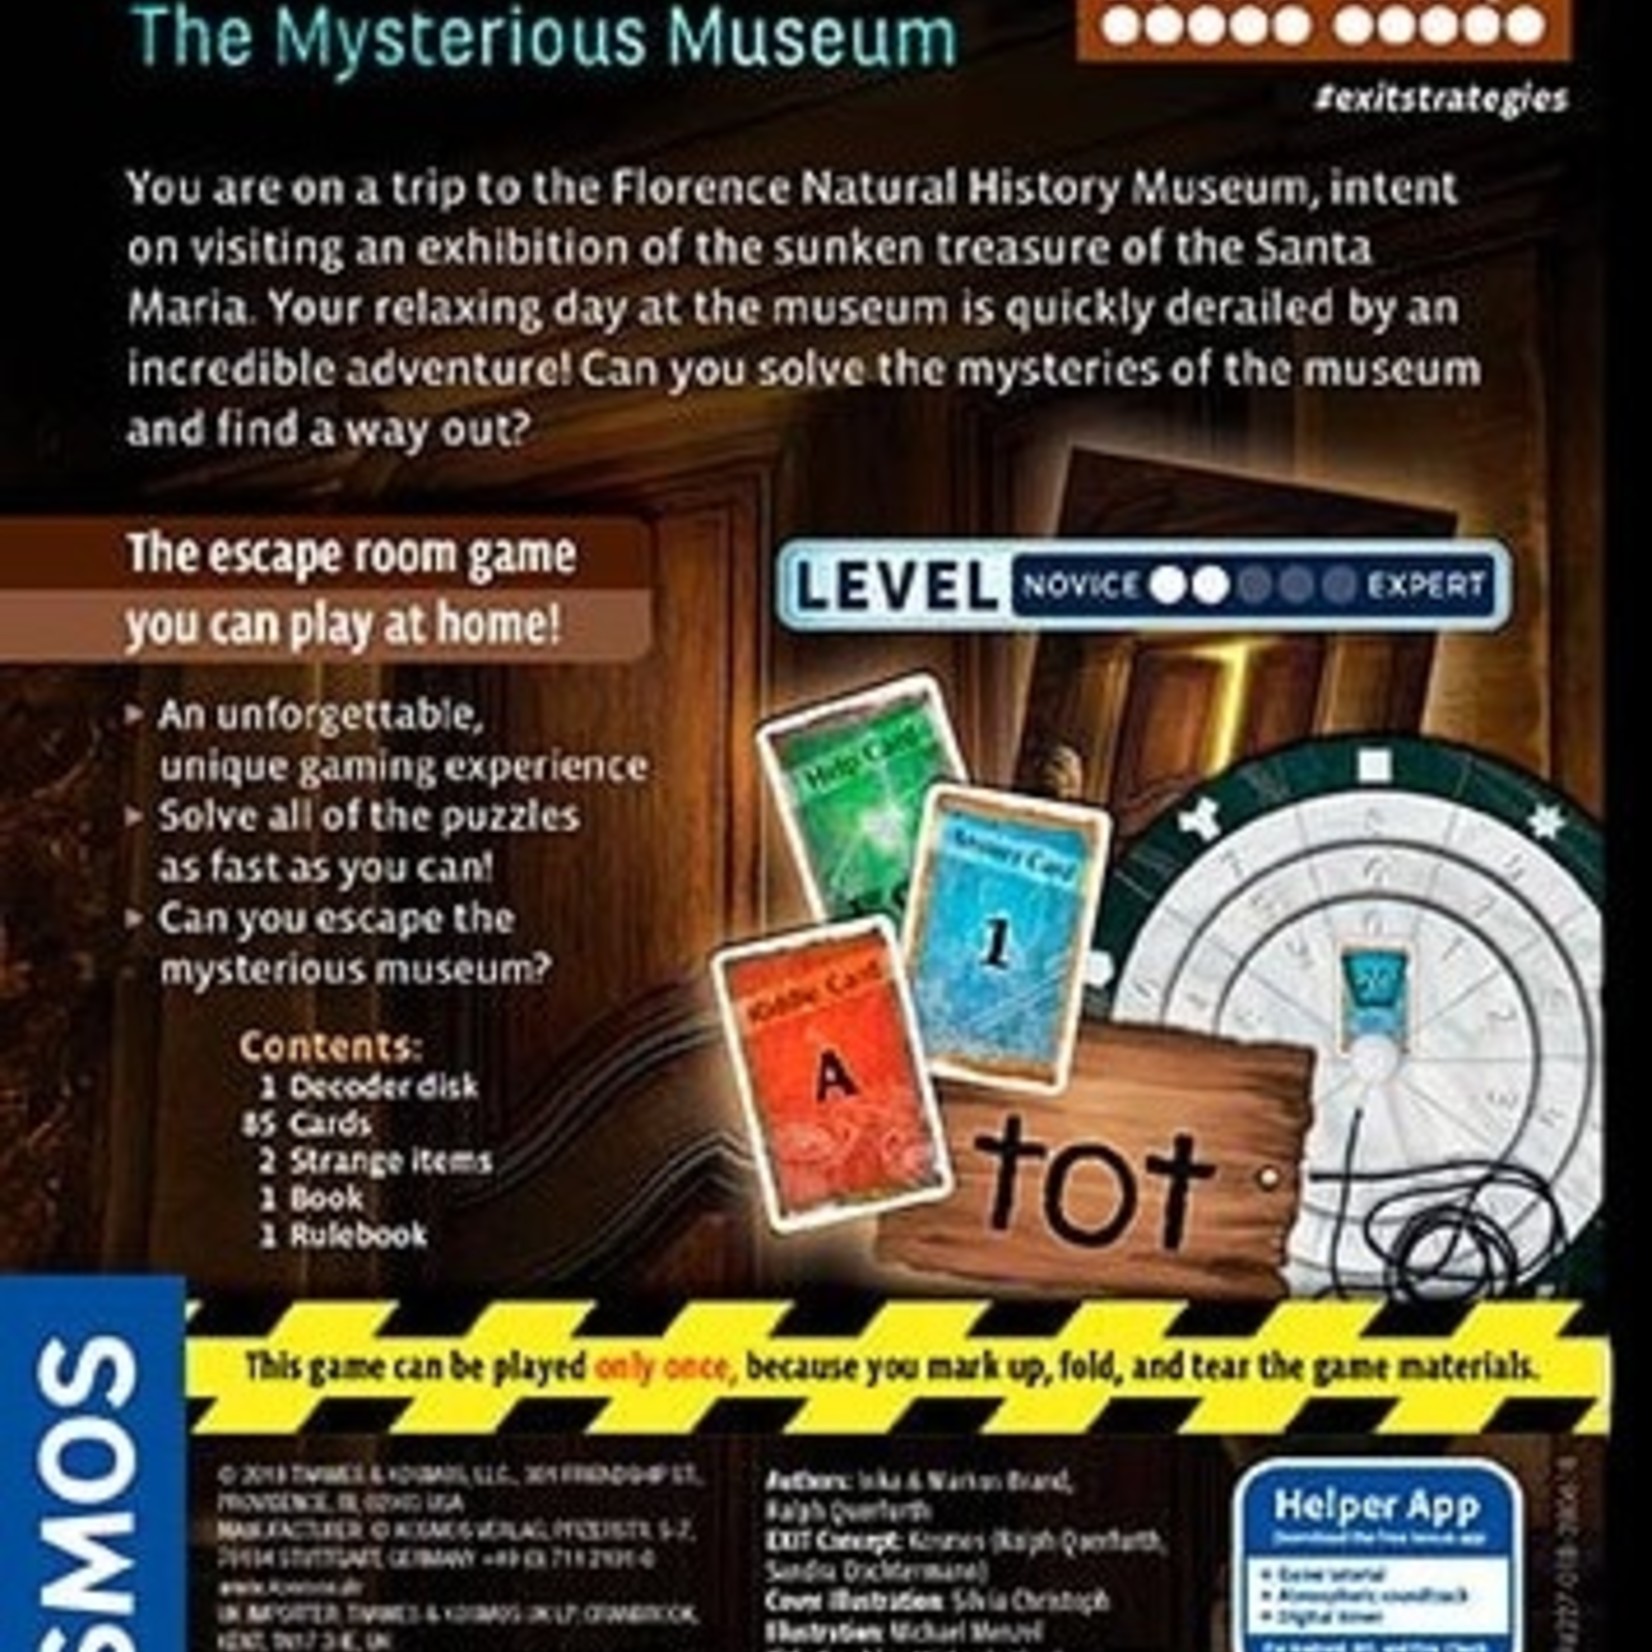 Thames and Kosmos Exit The Mysterious Museum